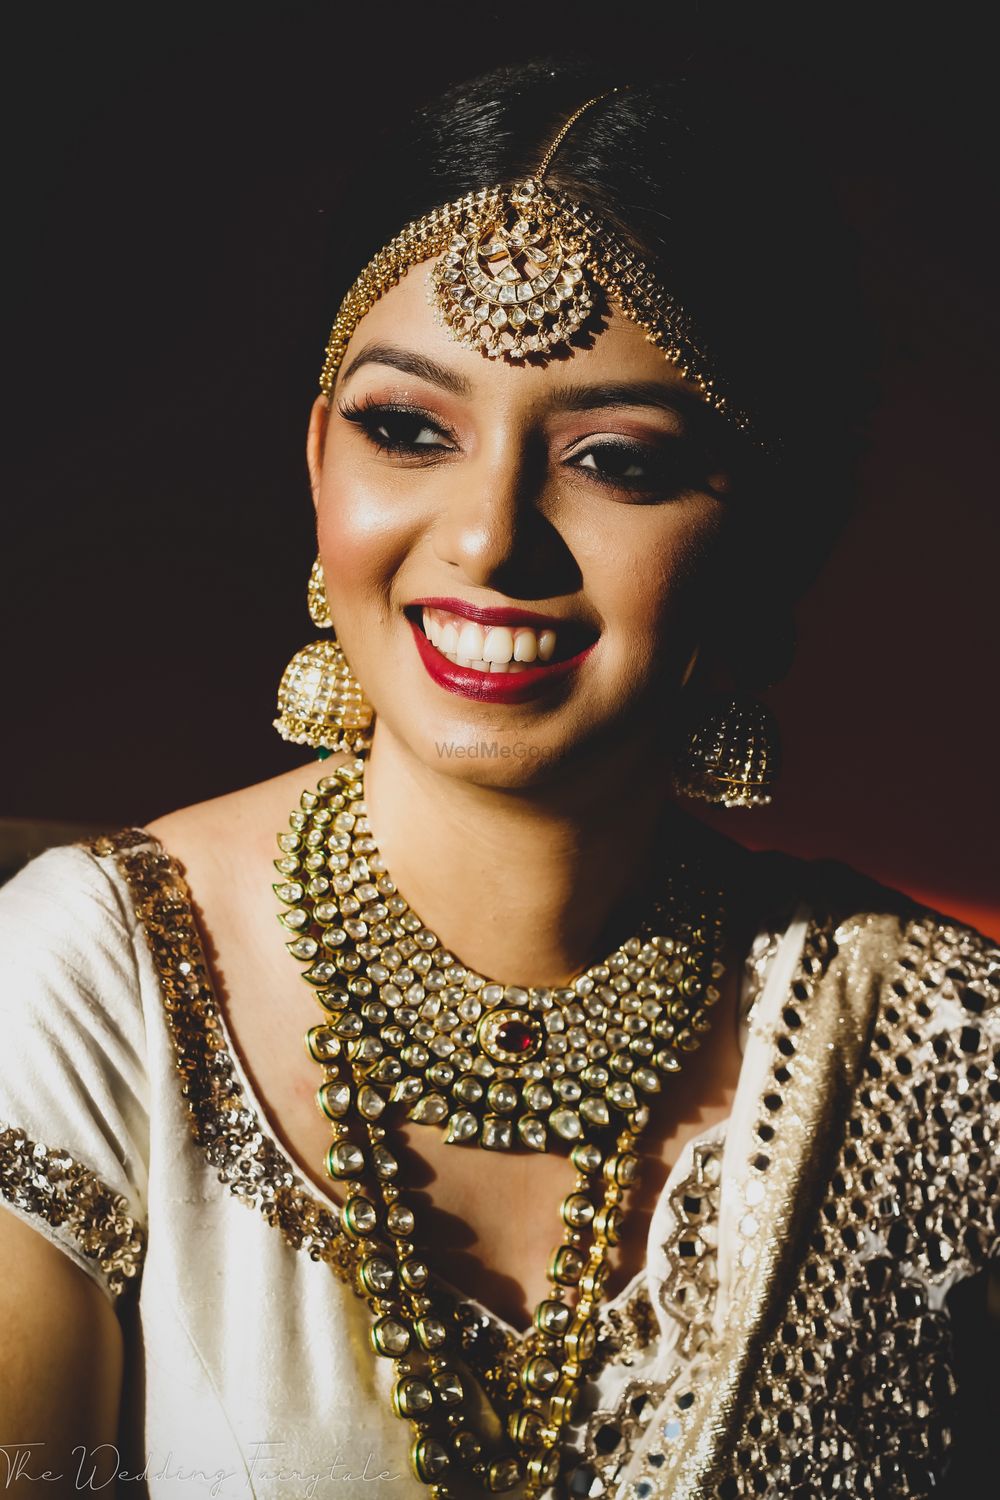 Photo From Anushka dhruv - By The Wedding Fairytale